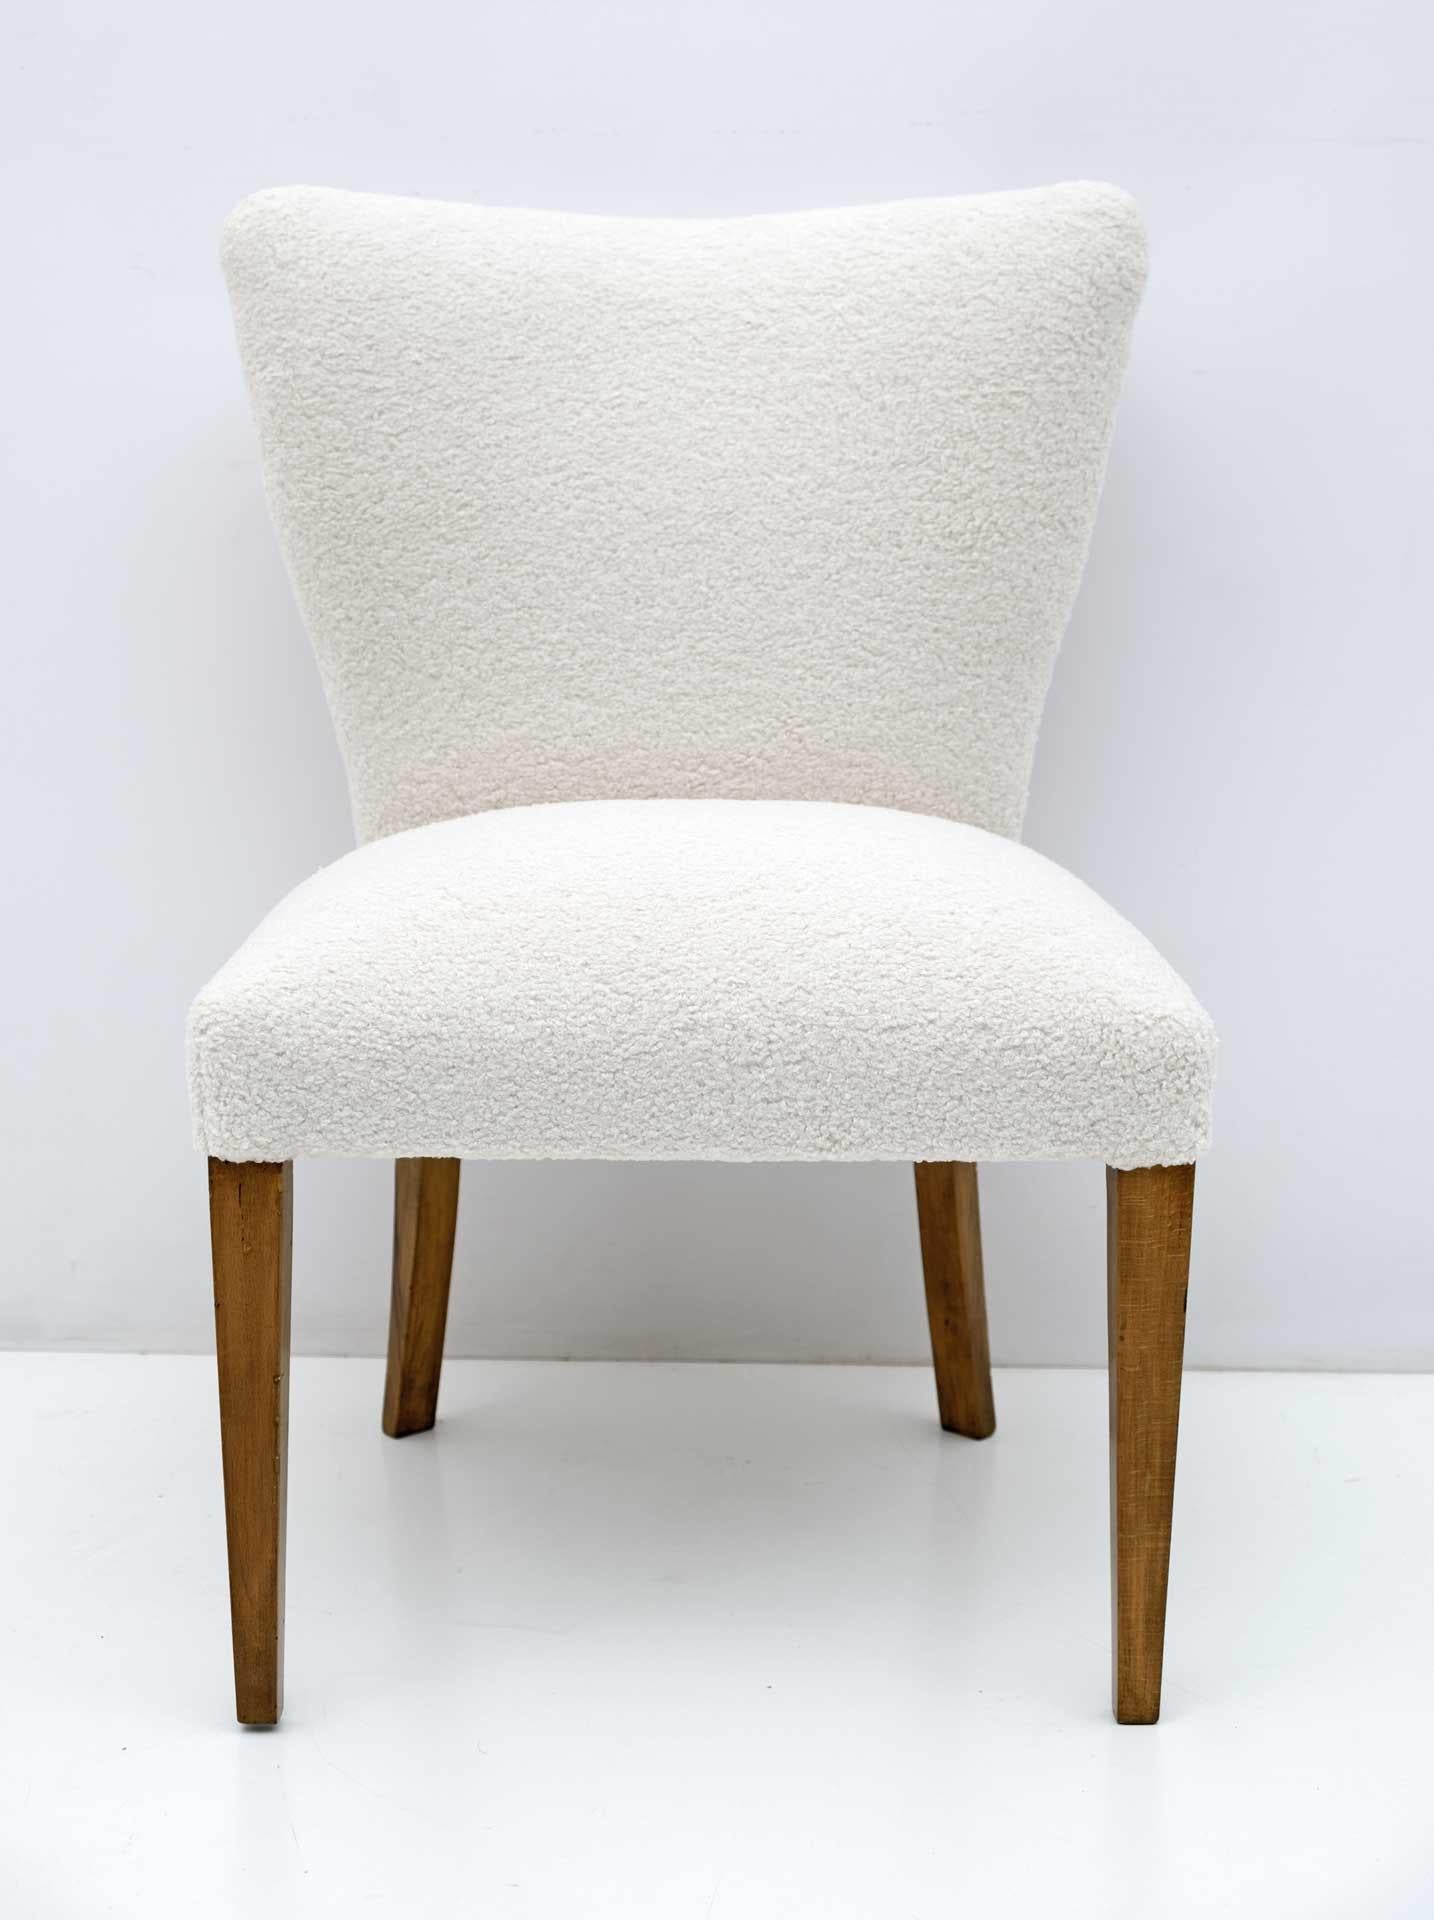 Mid-Century Modern small armchair, Italian production in the 1950s, completely restored and upholstered in Boucle fabric. It fits very well in a bedroom or living room.